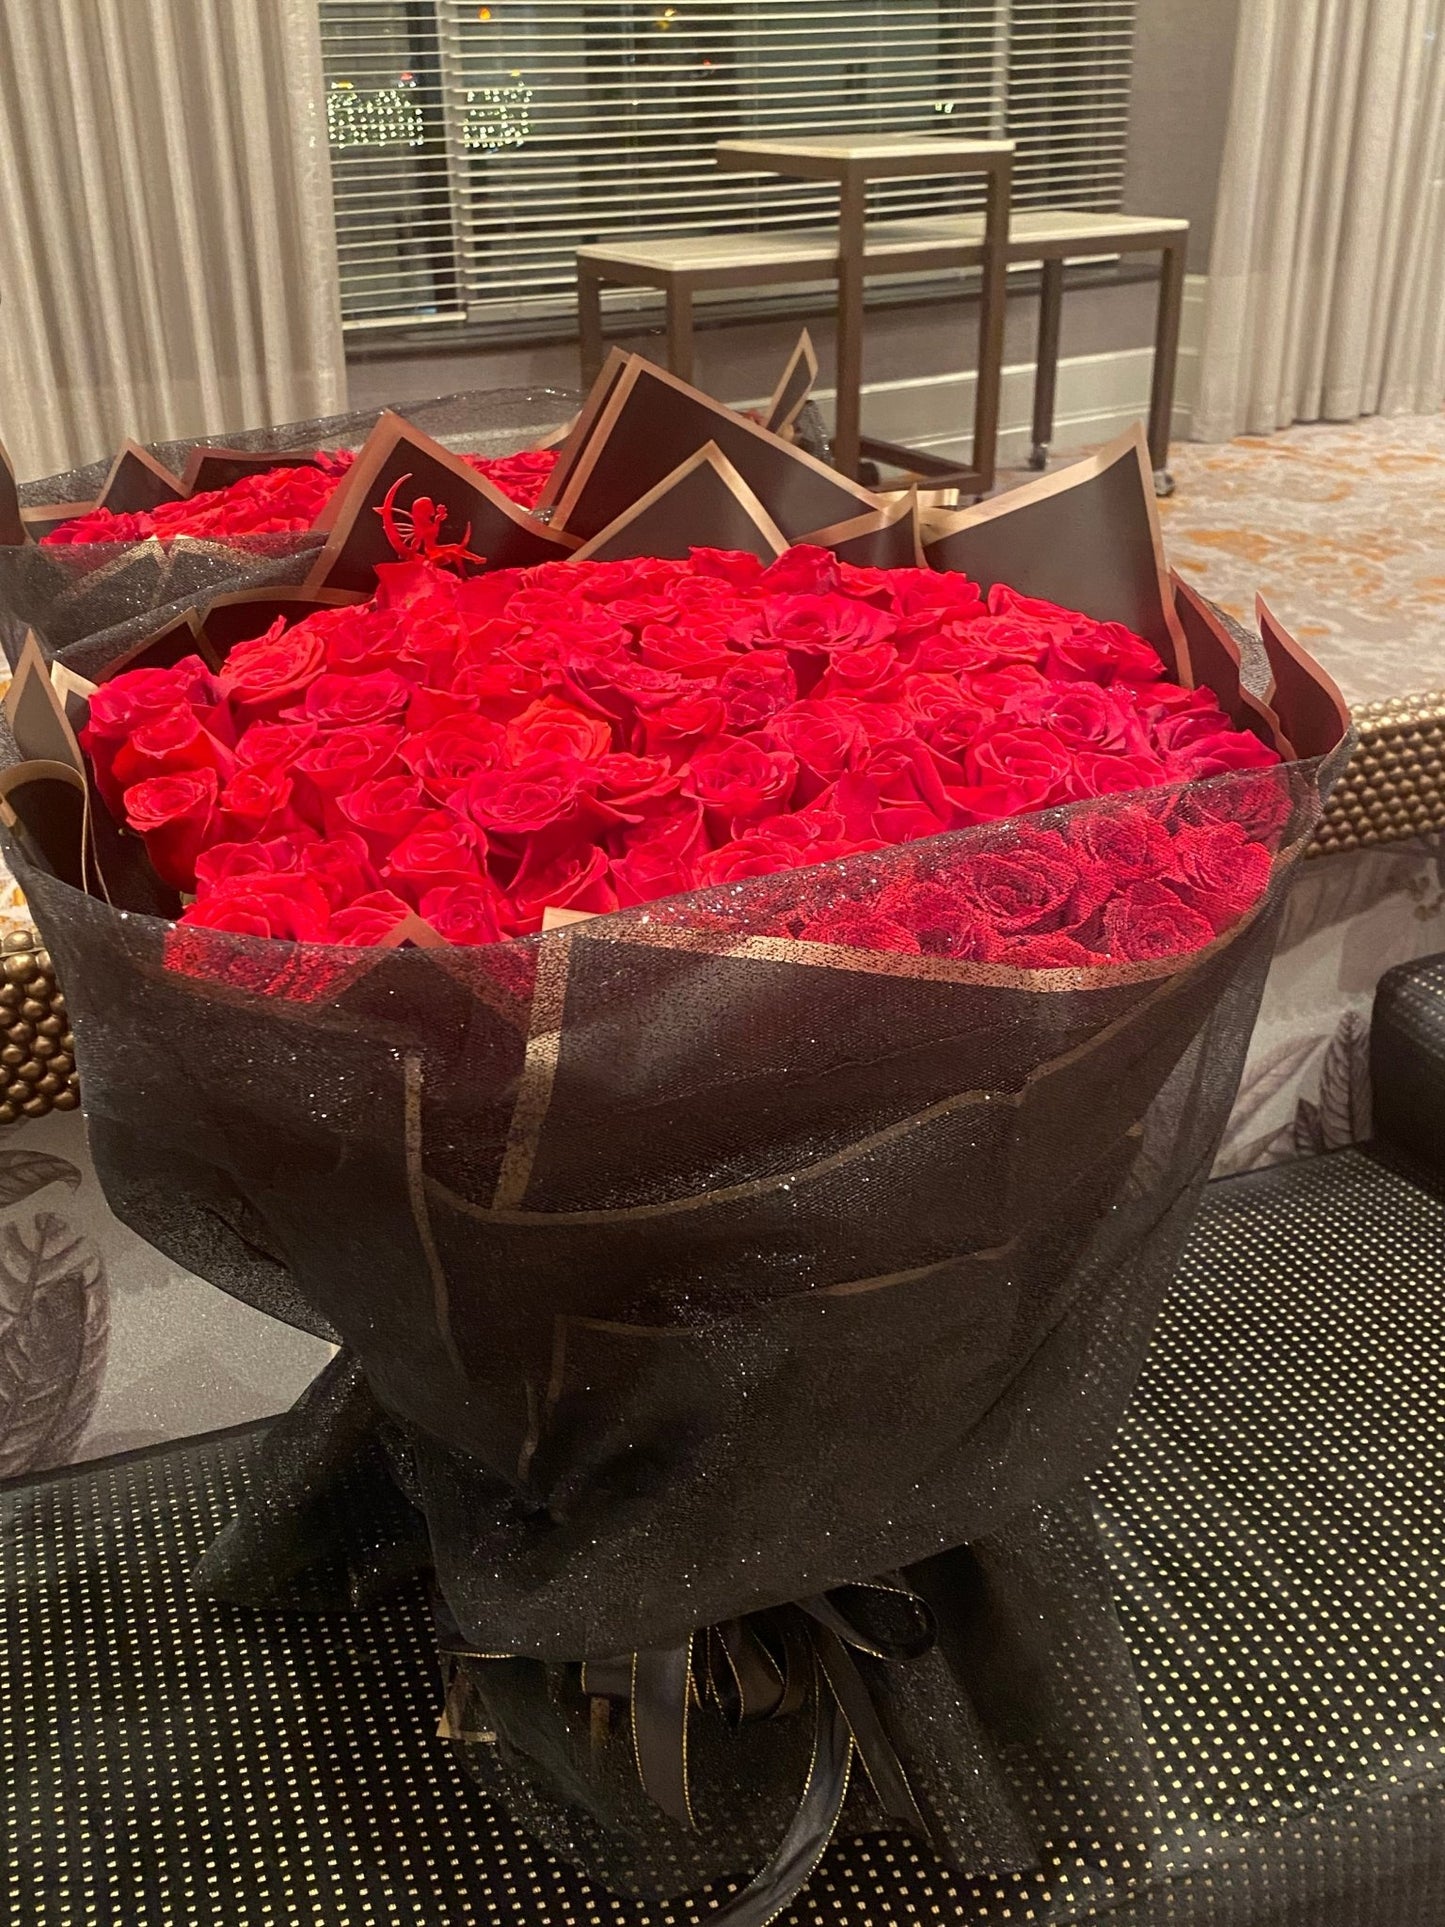 150 ROSES WRAPPED